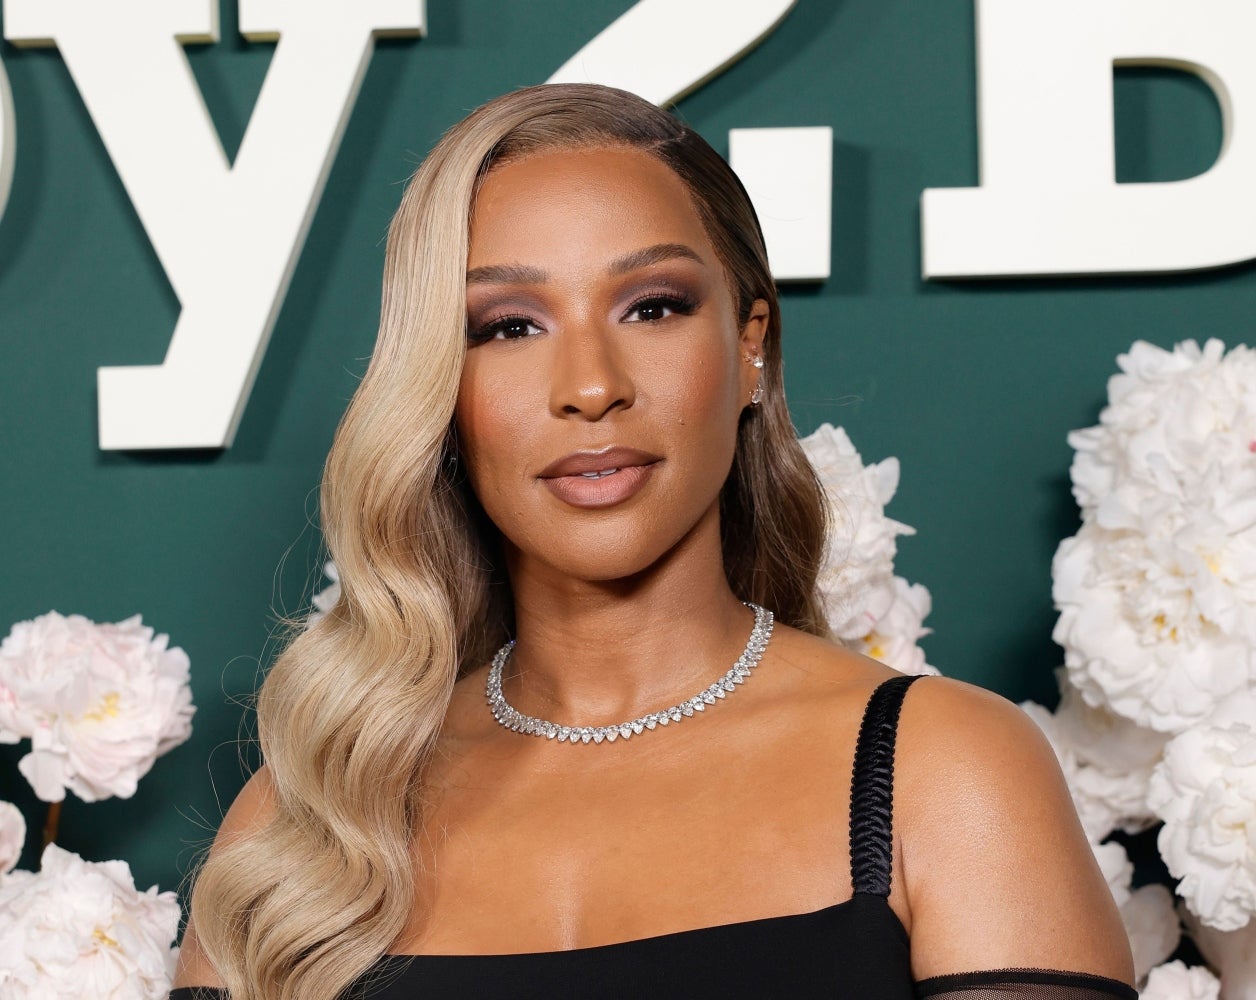 Savannah James’ Stylist Debunks Rumor That She Won't Take Pictures With Male Fans